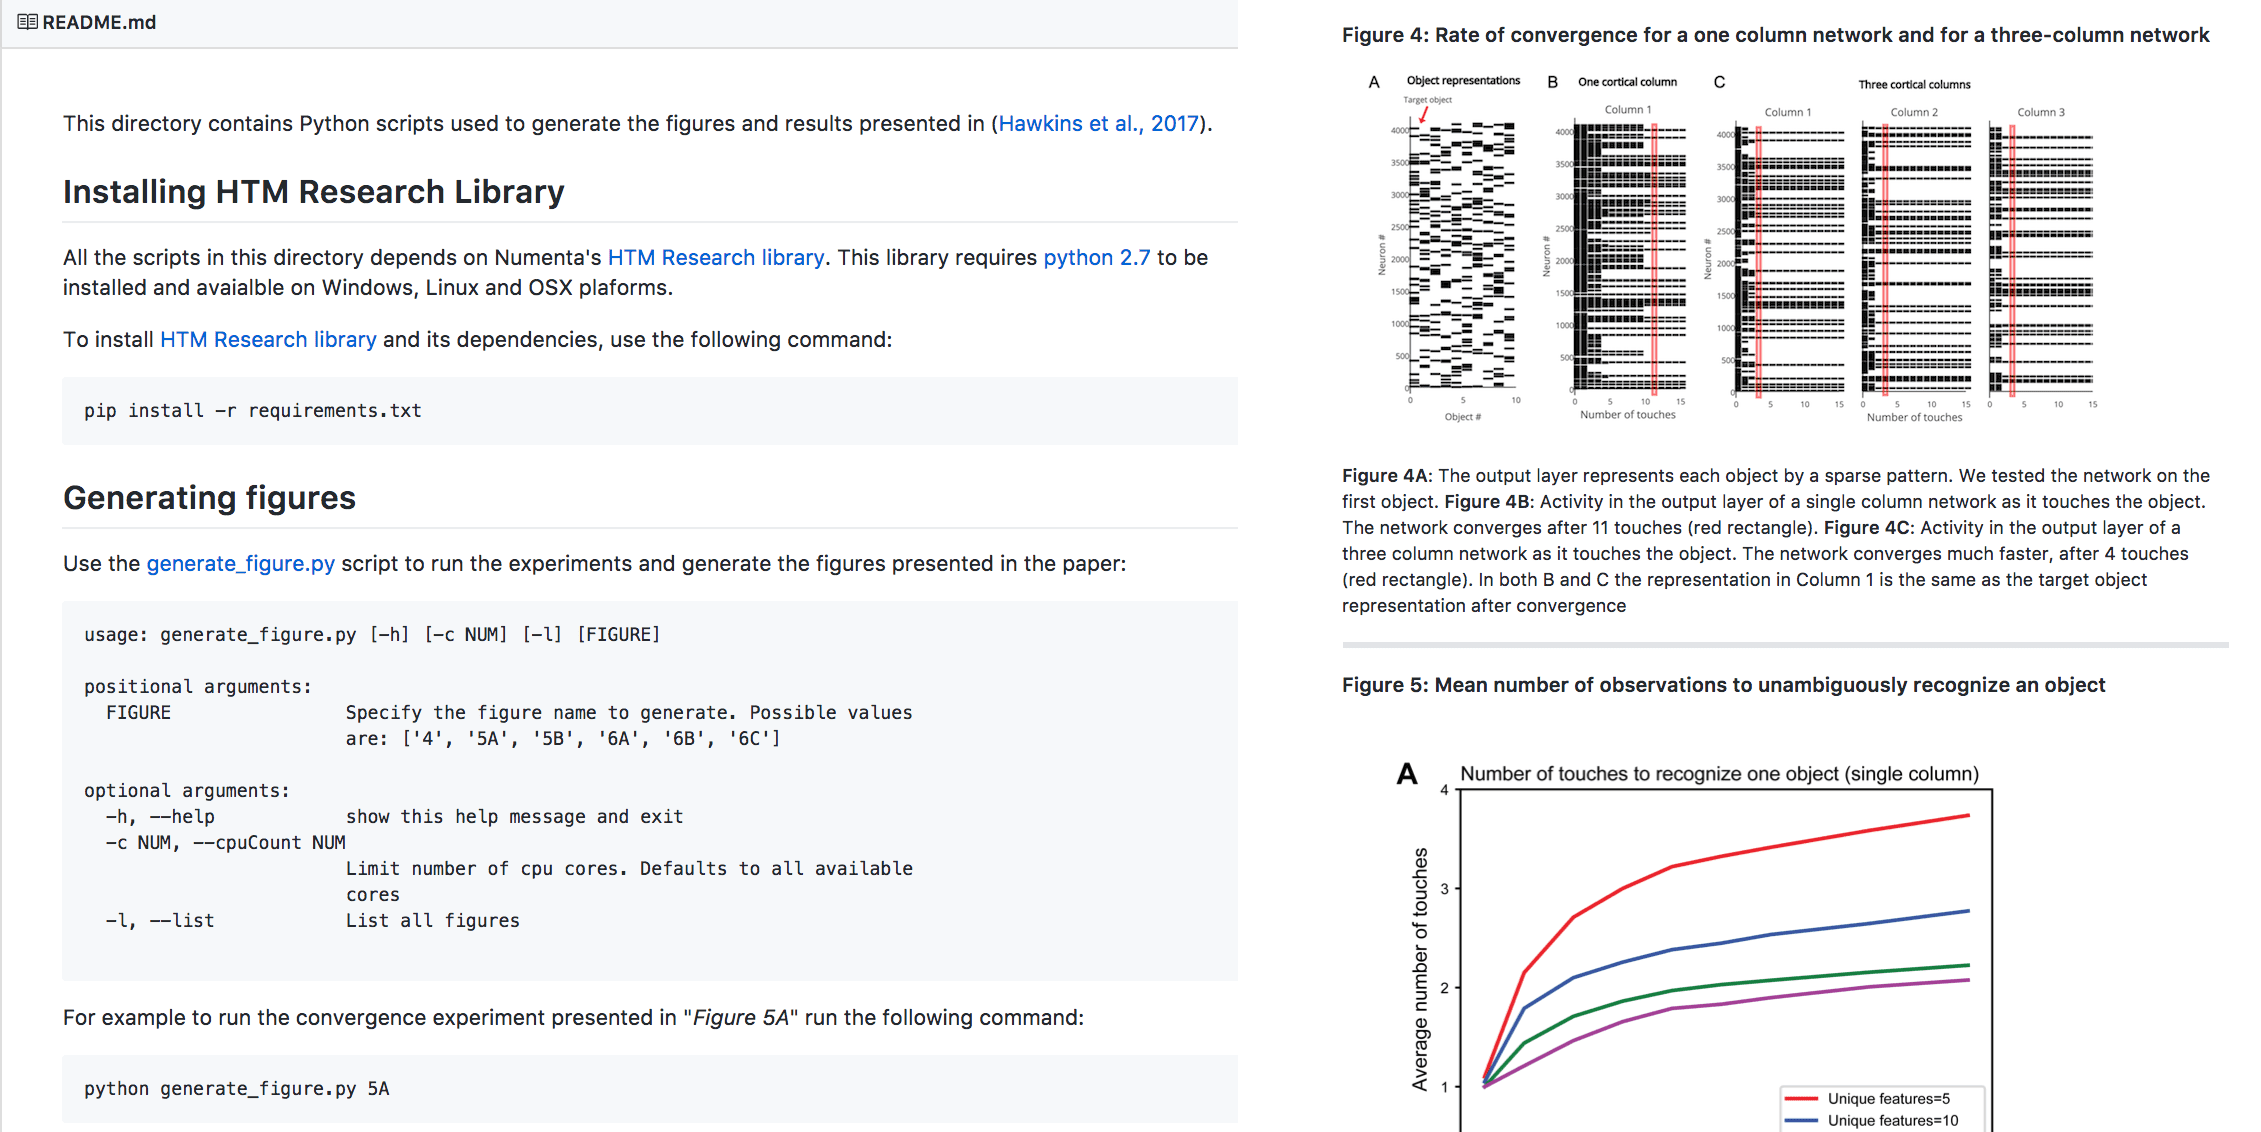 Replicating Scientific Results - Repository Readme Instructions and Figures